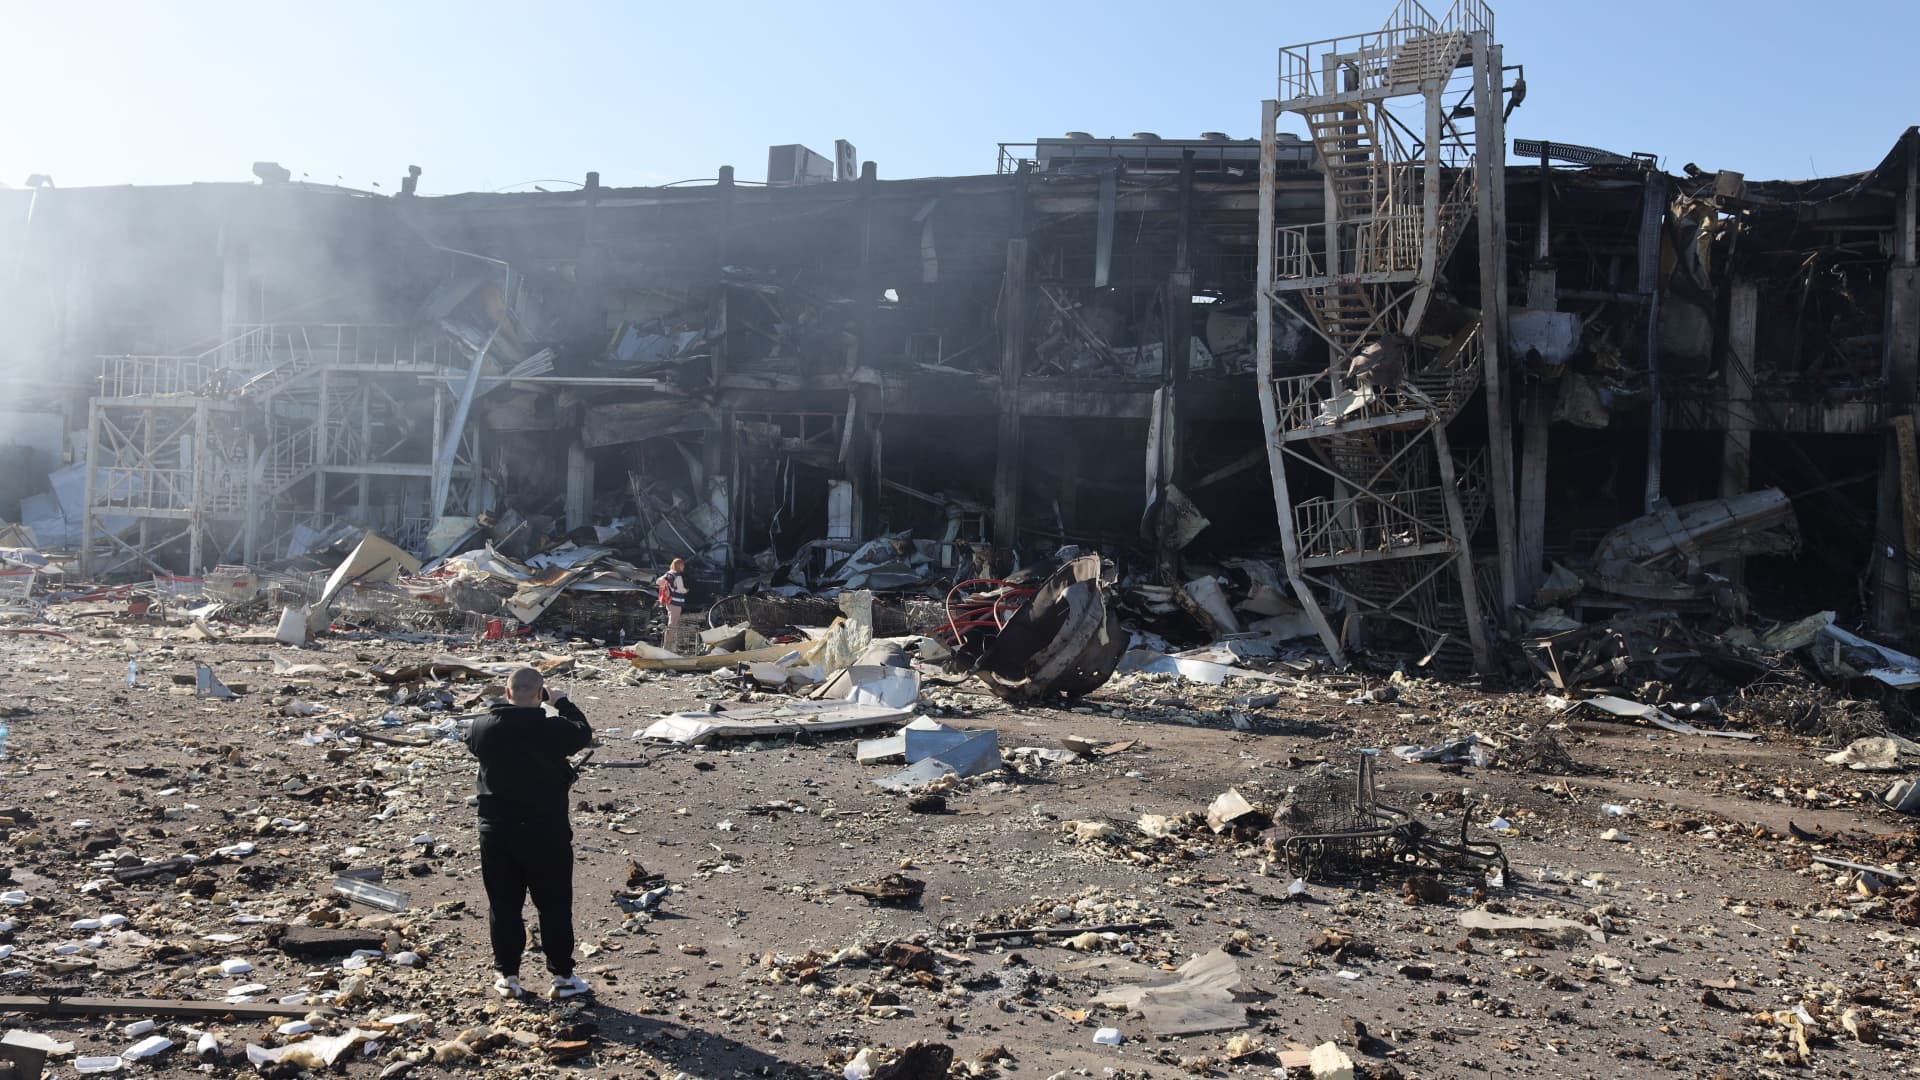 A man takes pictures of the shopping and entertainment center in the Ukrainian Black Sea city of Odessa on May 10, 2022, destroyed after Russian missiles strike late on May 9, 2022.